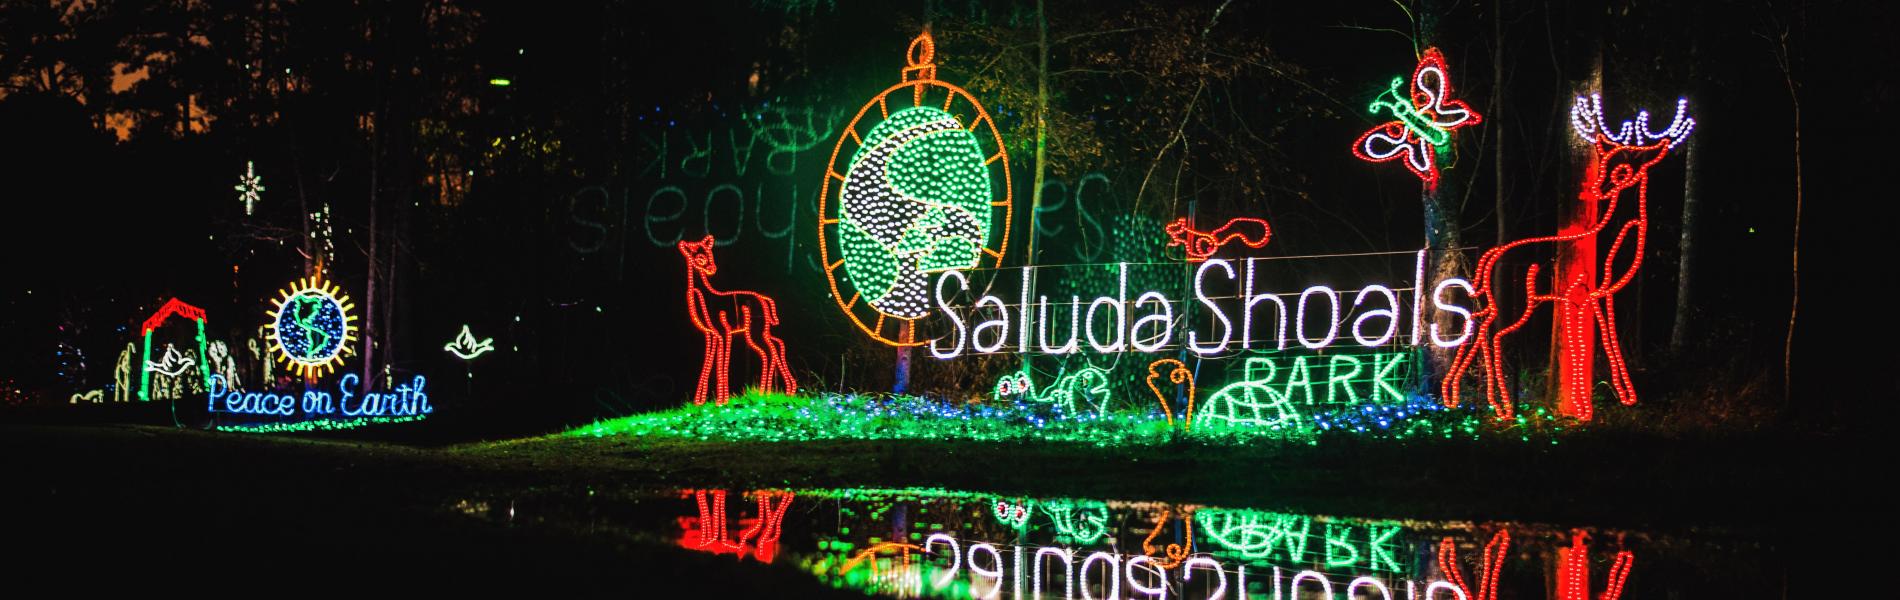 Holiday Lights on the River Saluda Shoals Park Lexington Chamber